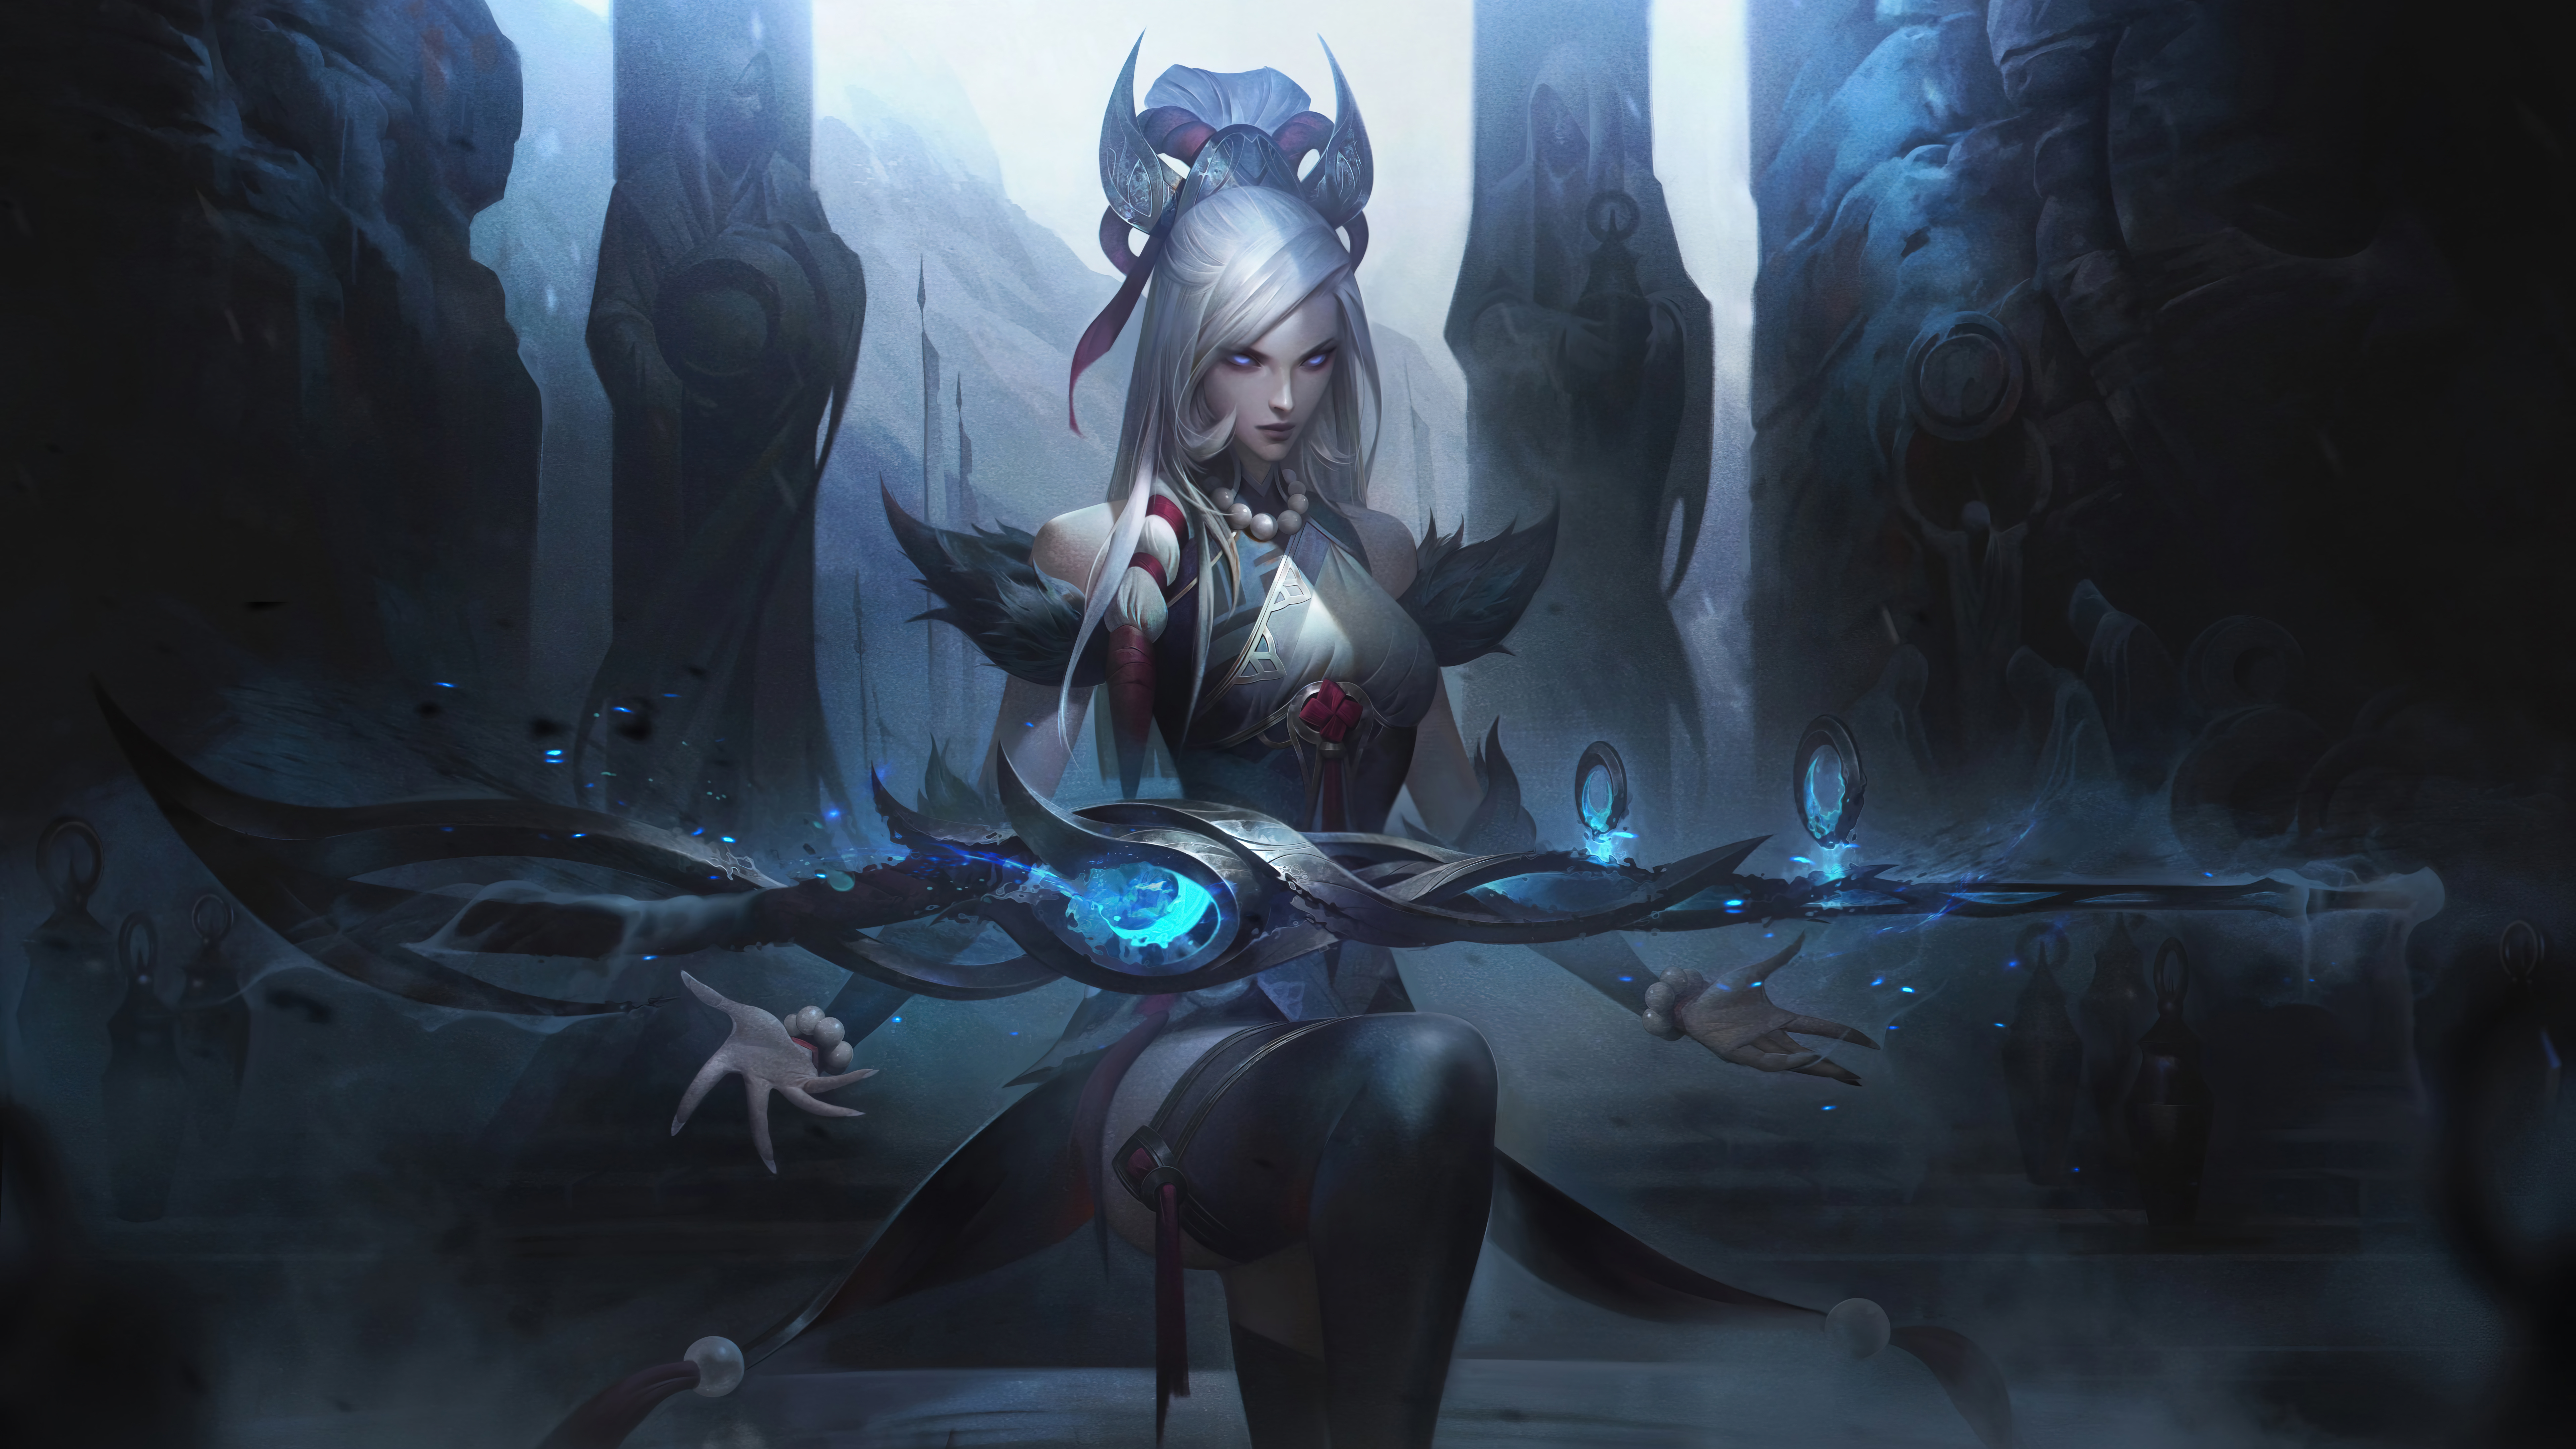 General 7680x4320 Snow Moon Caitlyn (League of Legends) ADC Adcarry video games GZG 4K Riot Games digital art League of Legends video game characters video game girls